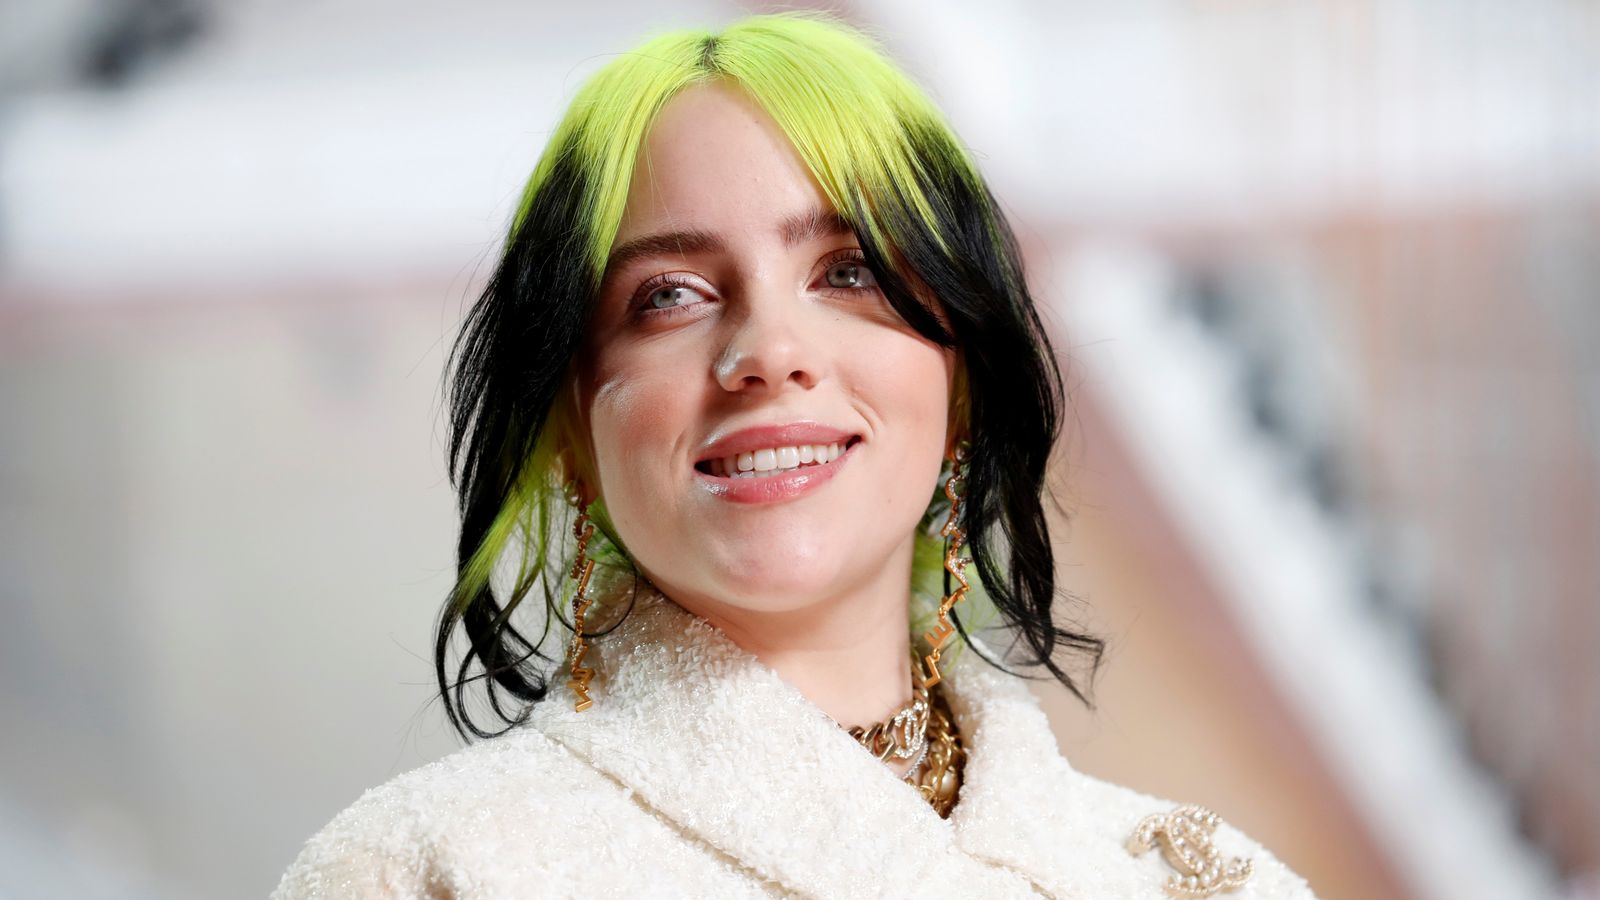 Billie Eilish 'appalled and embarrassed' by slur in singing clip from when  she was young, Ents & Arts News